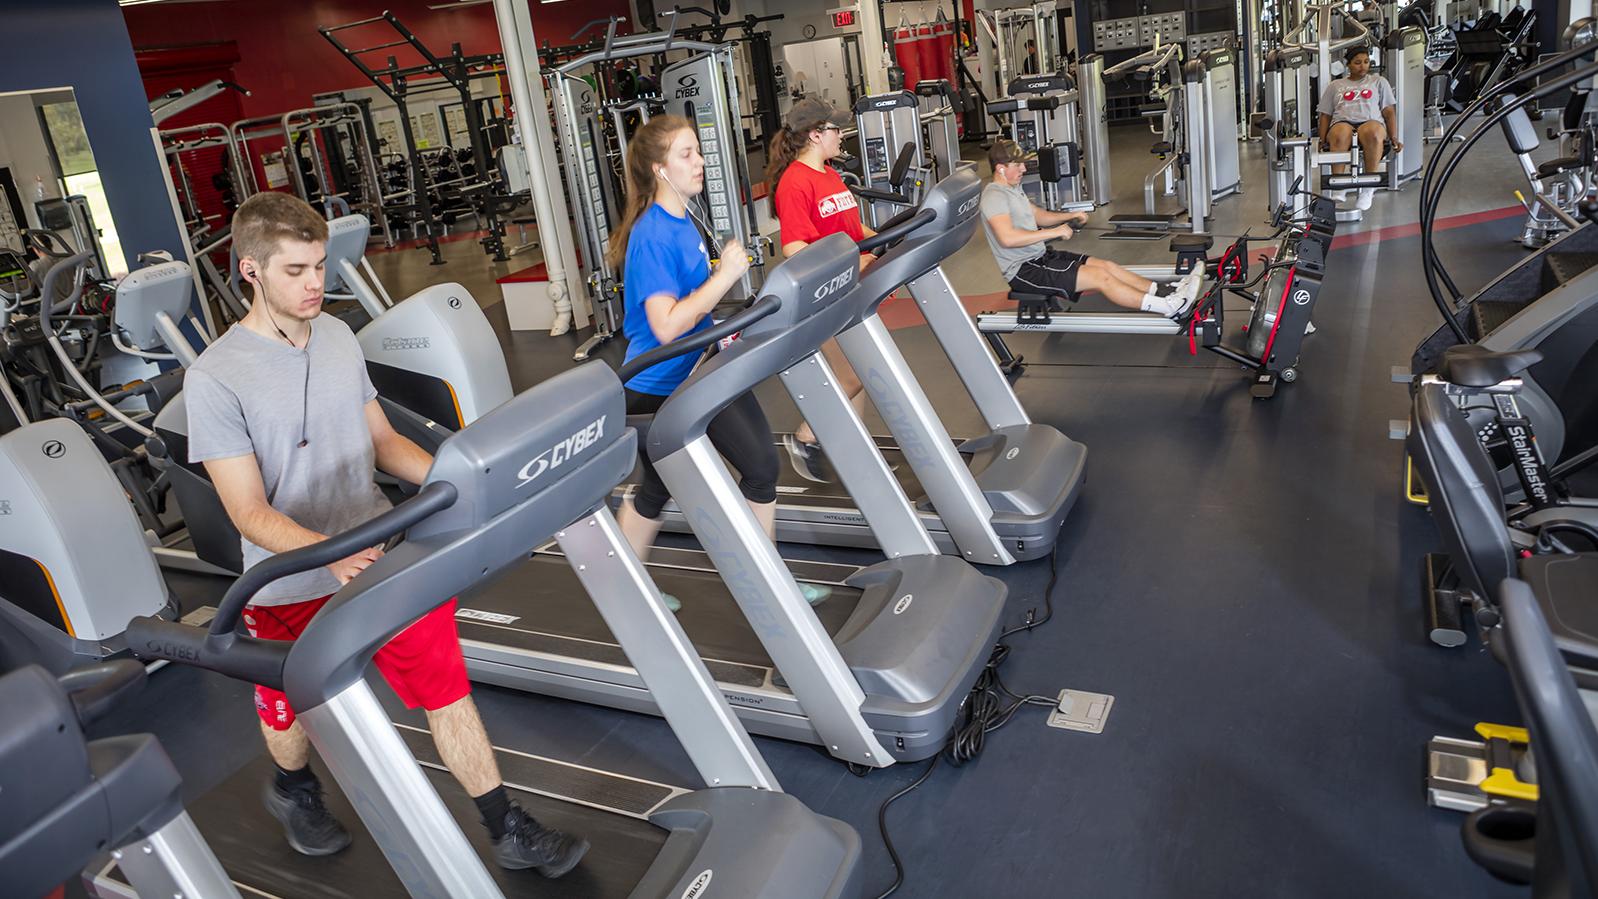 Three students use treadmills while one two others use weight equipment in the Adena Recreation Center.